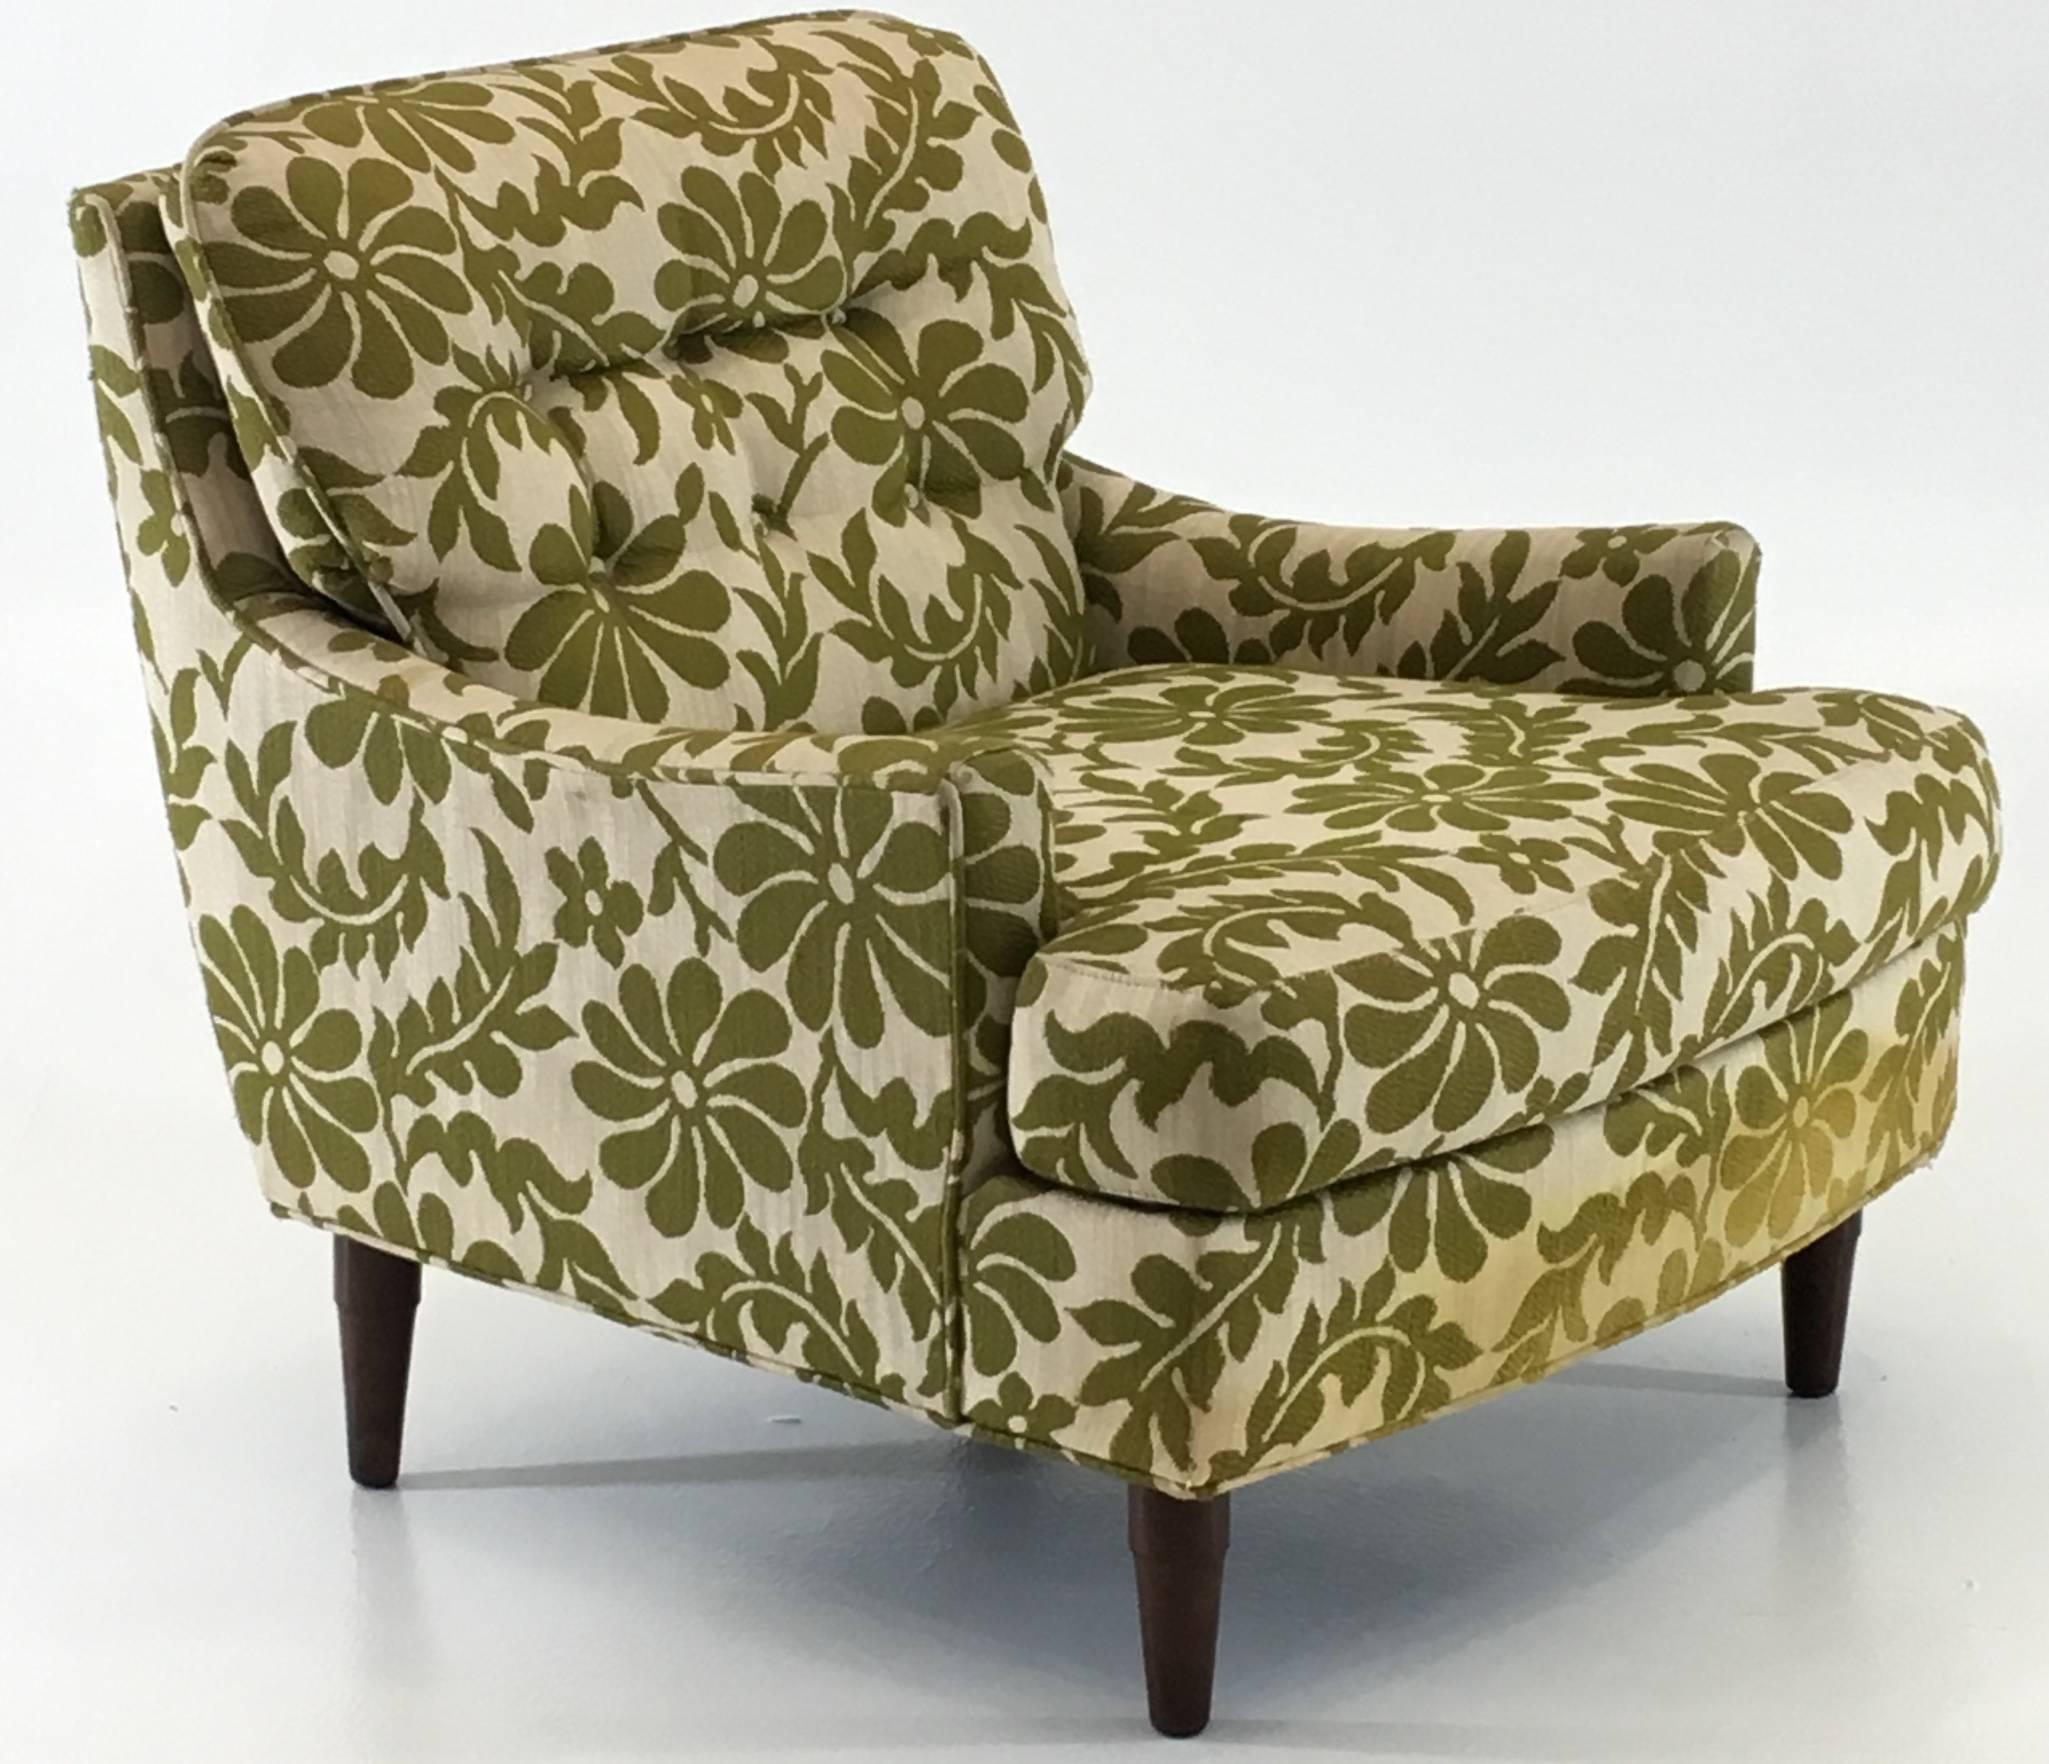 Selig of Monroe
USA, circa 1965
Armchair
Measures: 29 tall x 32 deep and 28 wide. Seat height 15.5 and arm height 18.5 inches.

A very smart low profile lounge armchair by Selig with Danish styling in curved arms and a subtle tapering of all